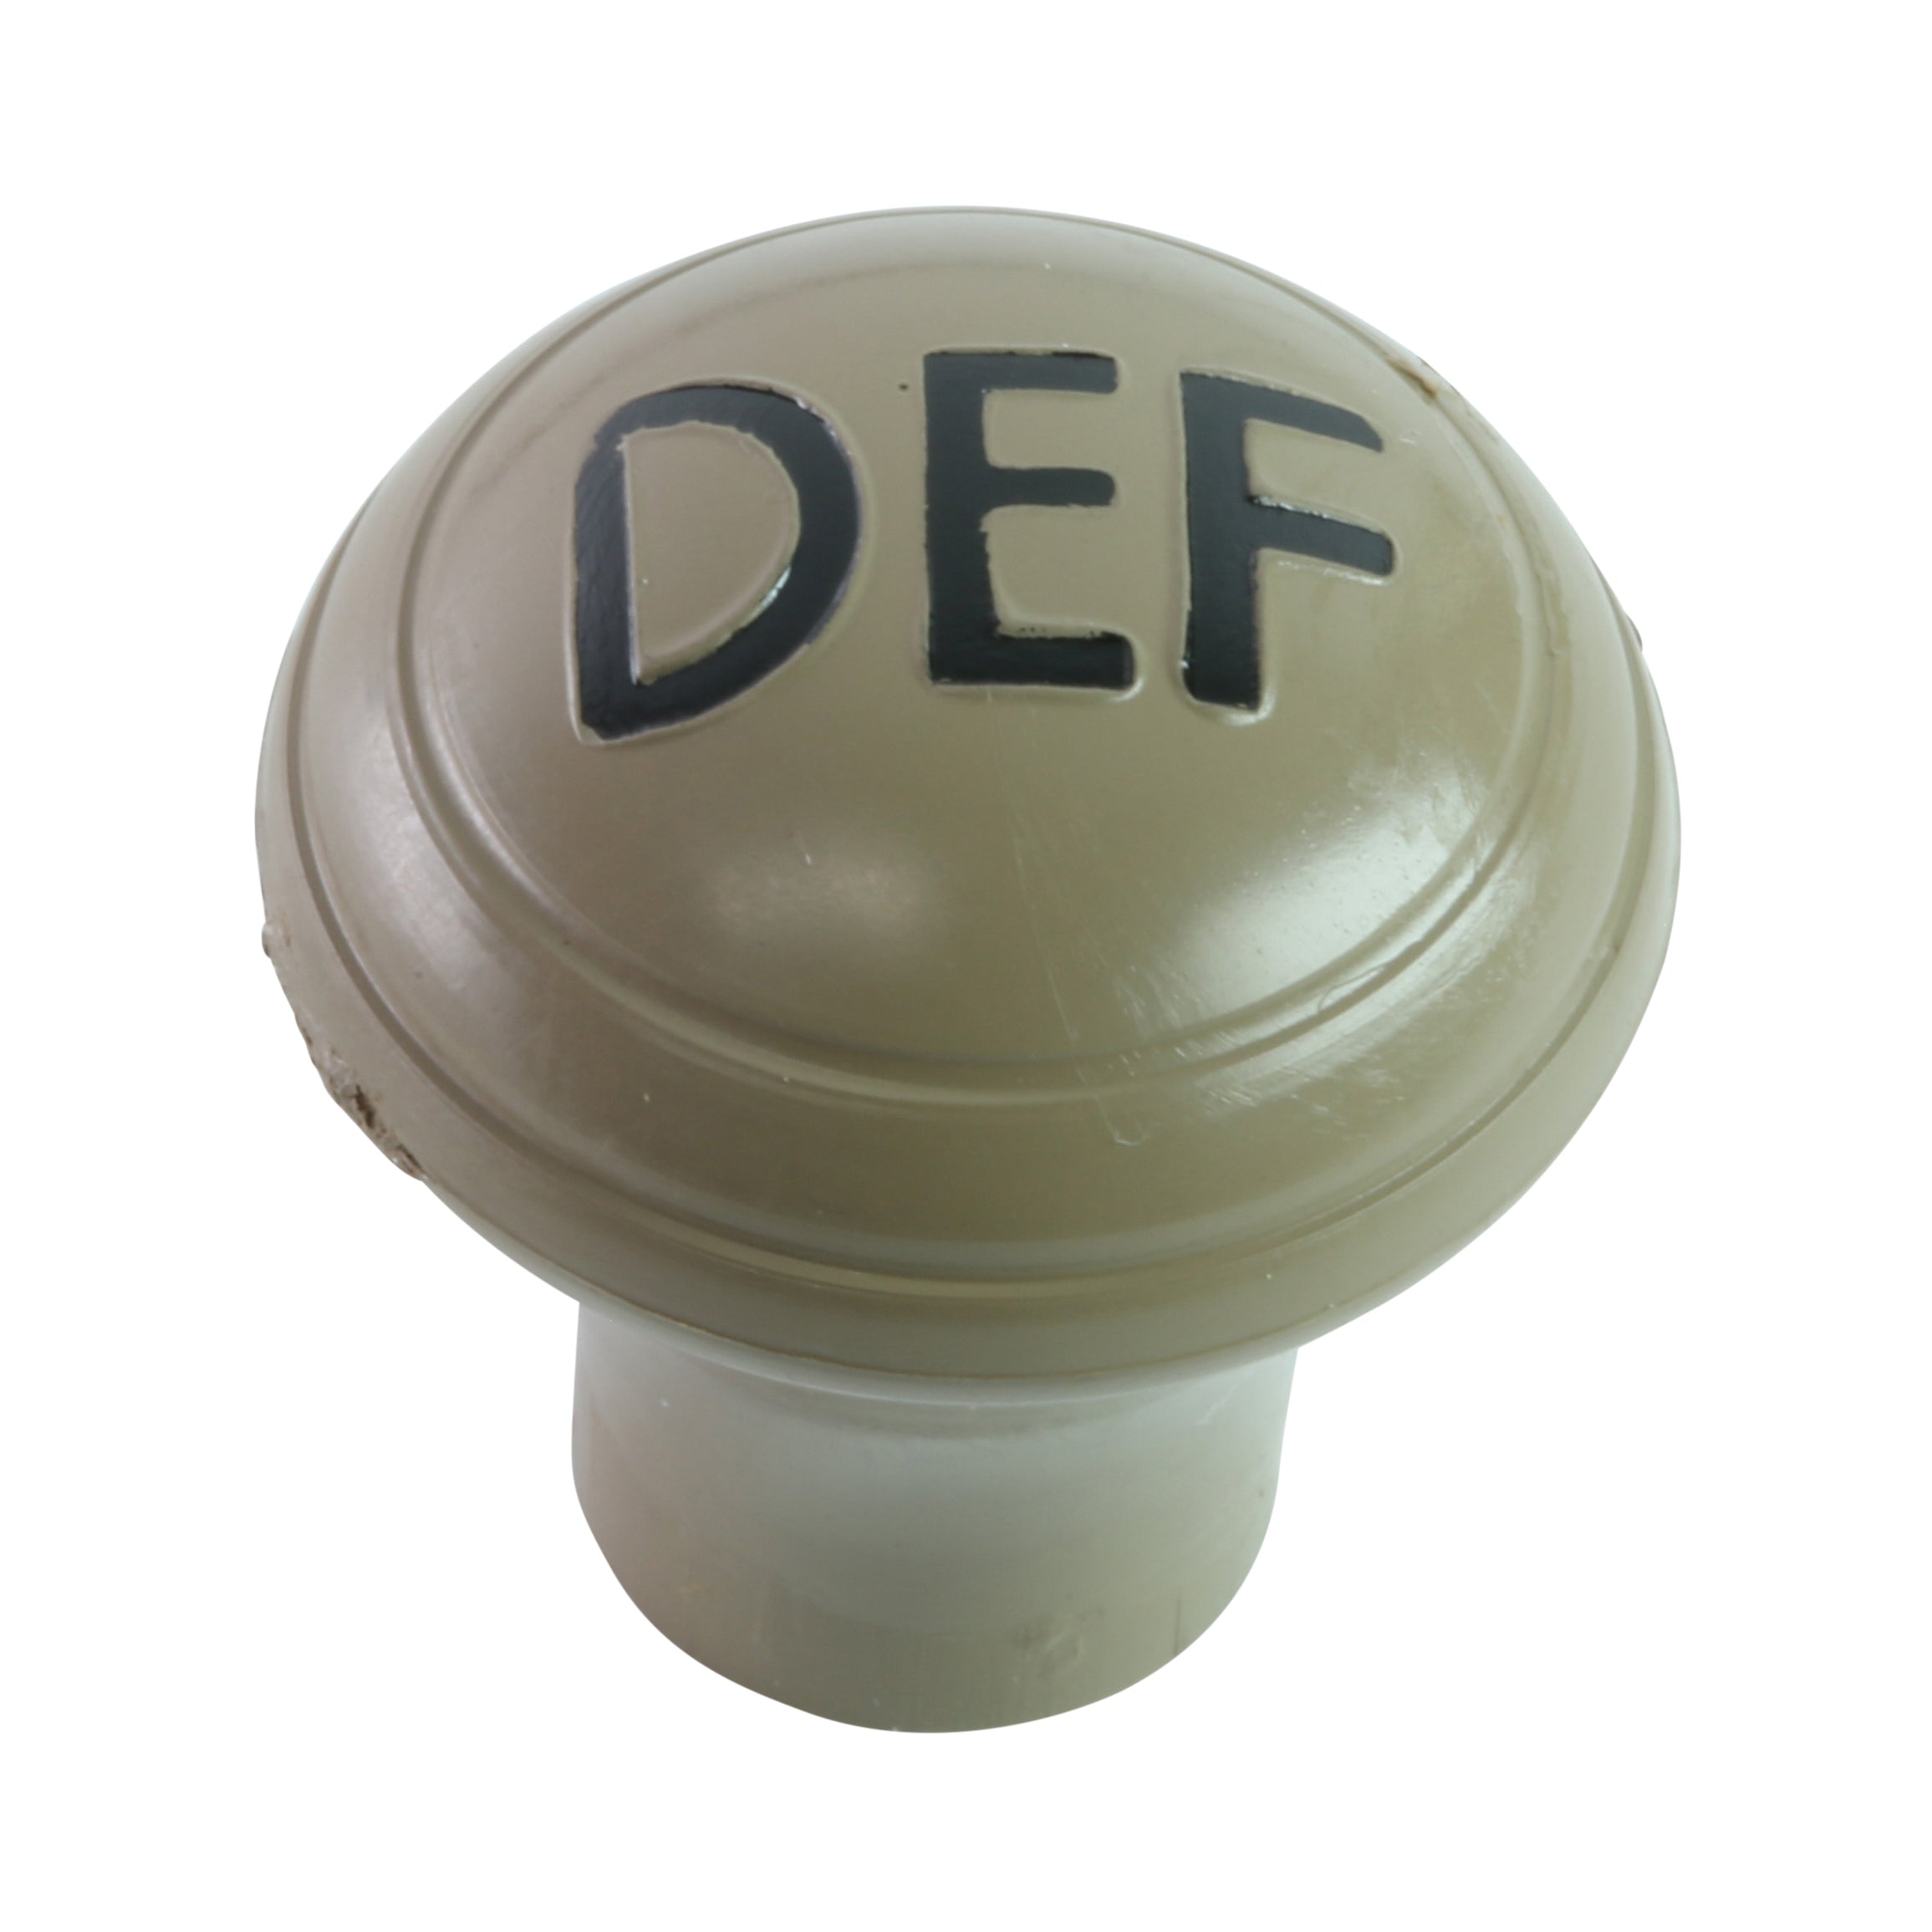 Hot Water Heater Defroster Knob • 1947-48 Ford